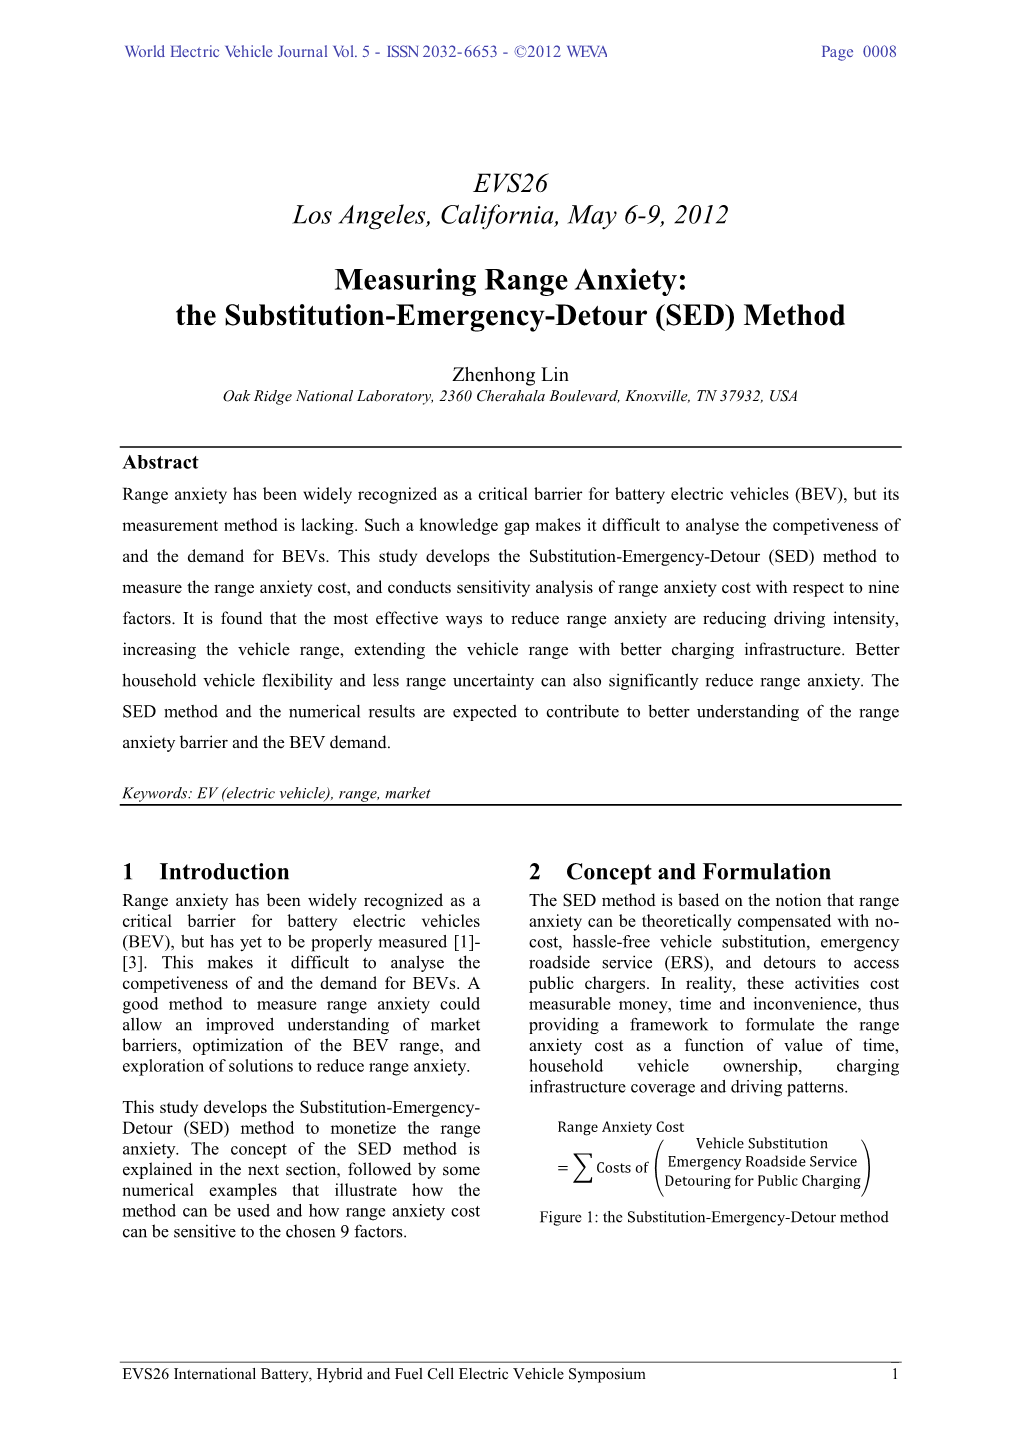 Measuring Range Anxiety: the Substitution-Emergency-Detour (SED) Method